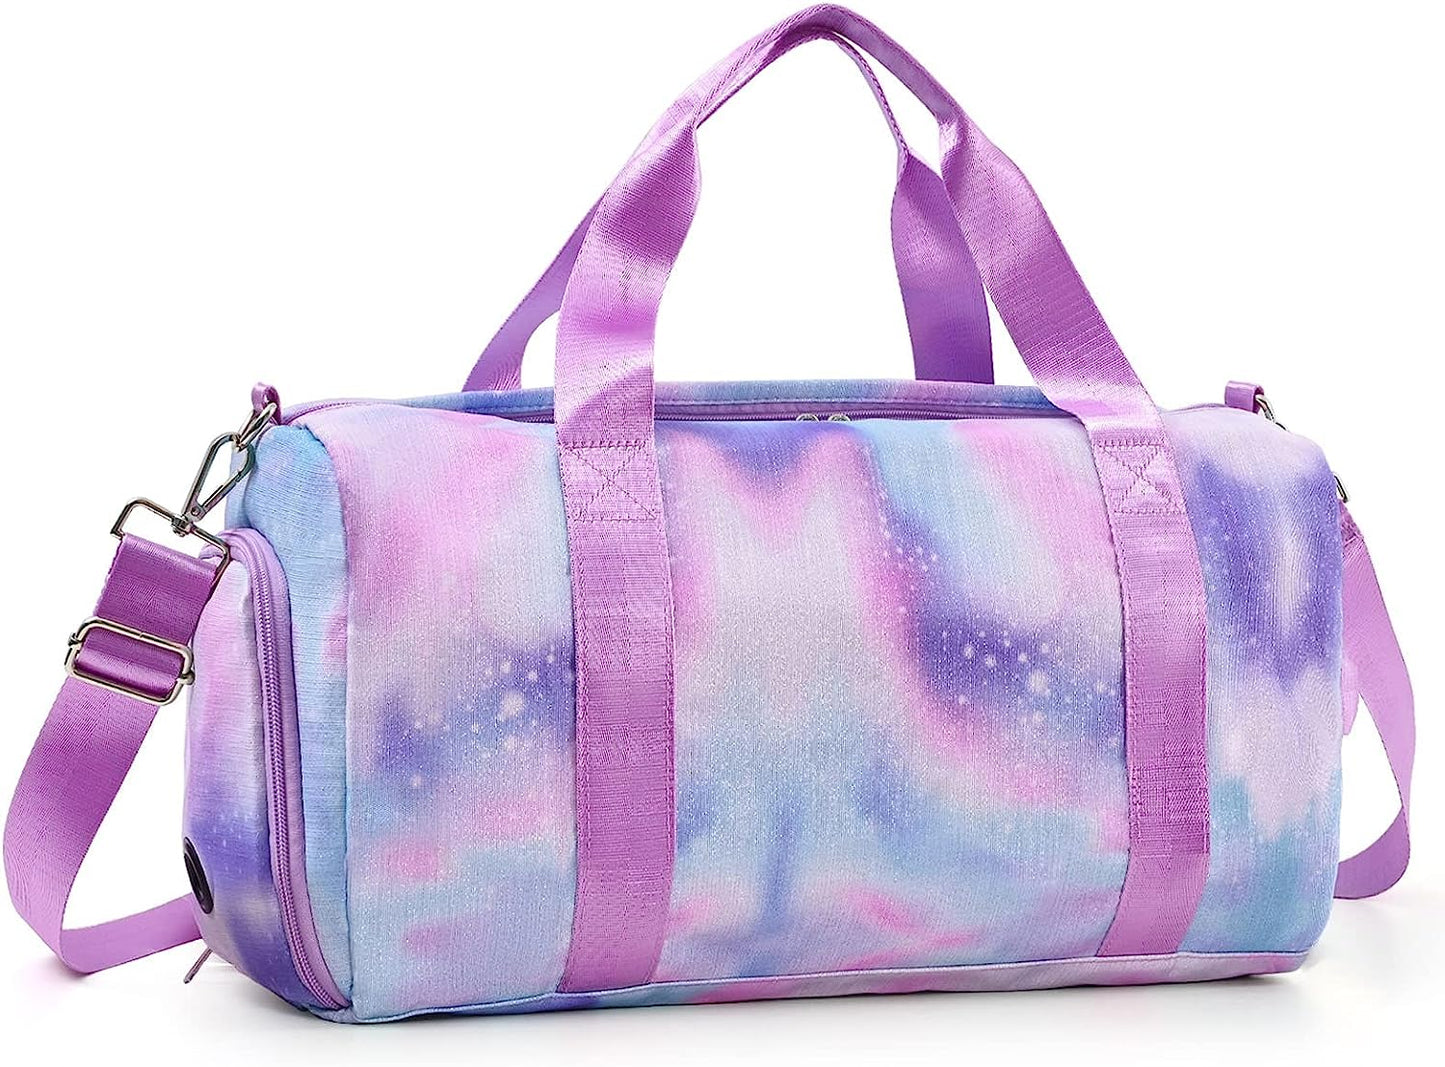 AFFORDABLE RUGICI Travel Duffel Bags for Girls Kids Waterproof Sports Gym Bag for Women, Tie-dye Dance Bag for Girls Teen Overnight Duffel Bag with Shoe Compartment Ballet Small Gym Bag（Pink Rainbow）